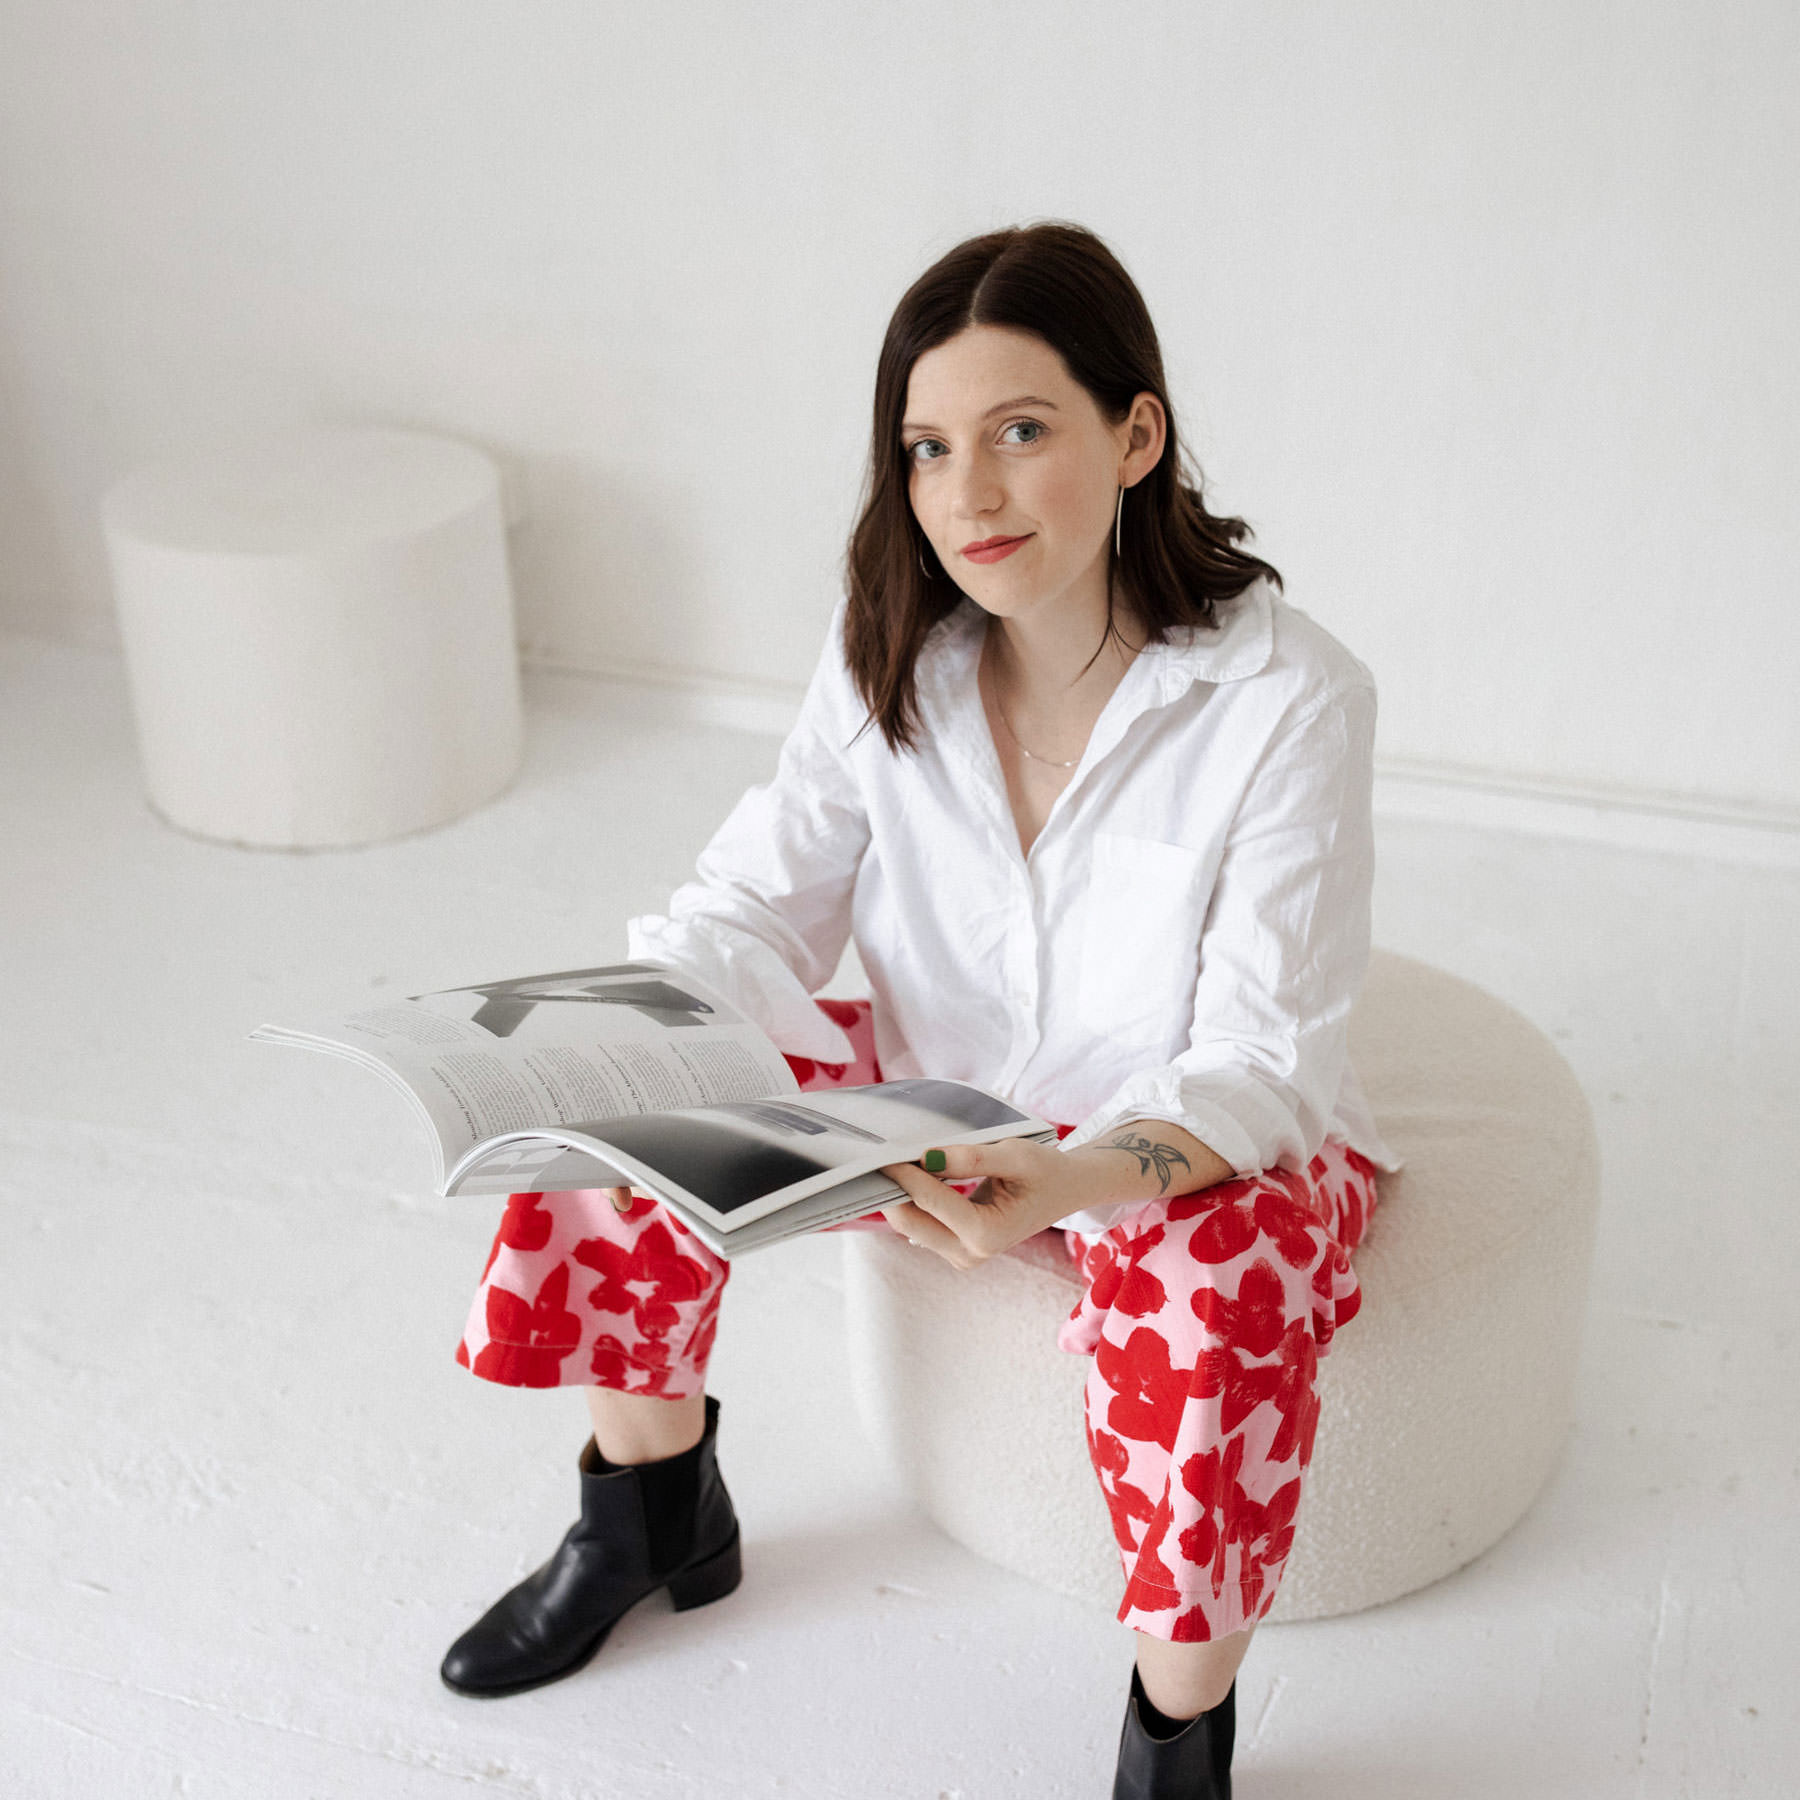 amy pearson flower jeans black boots reading magazine looking at camera